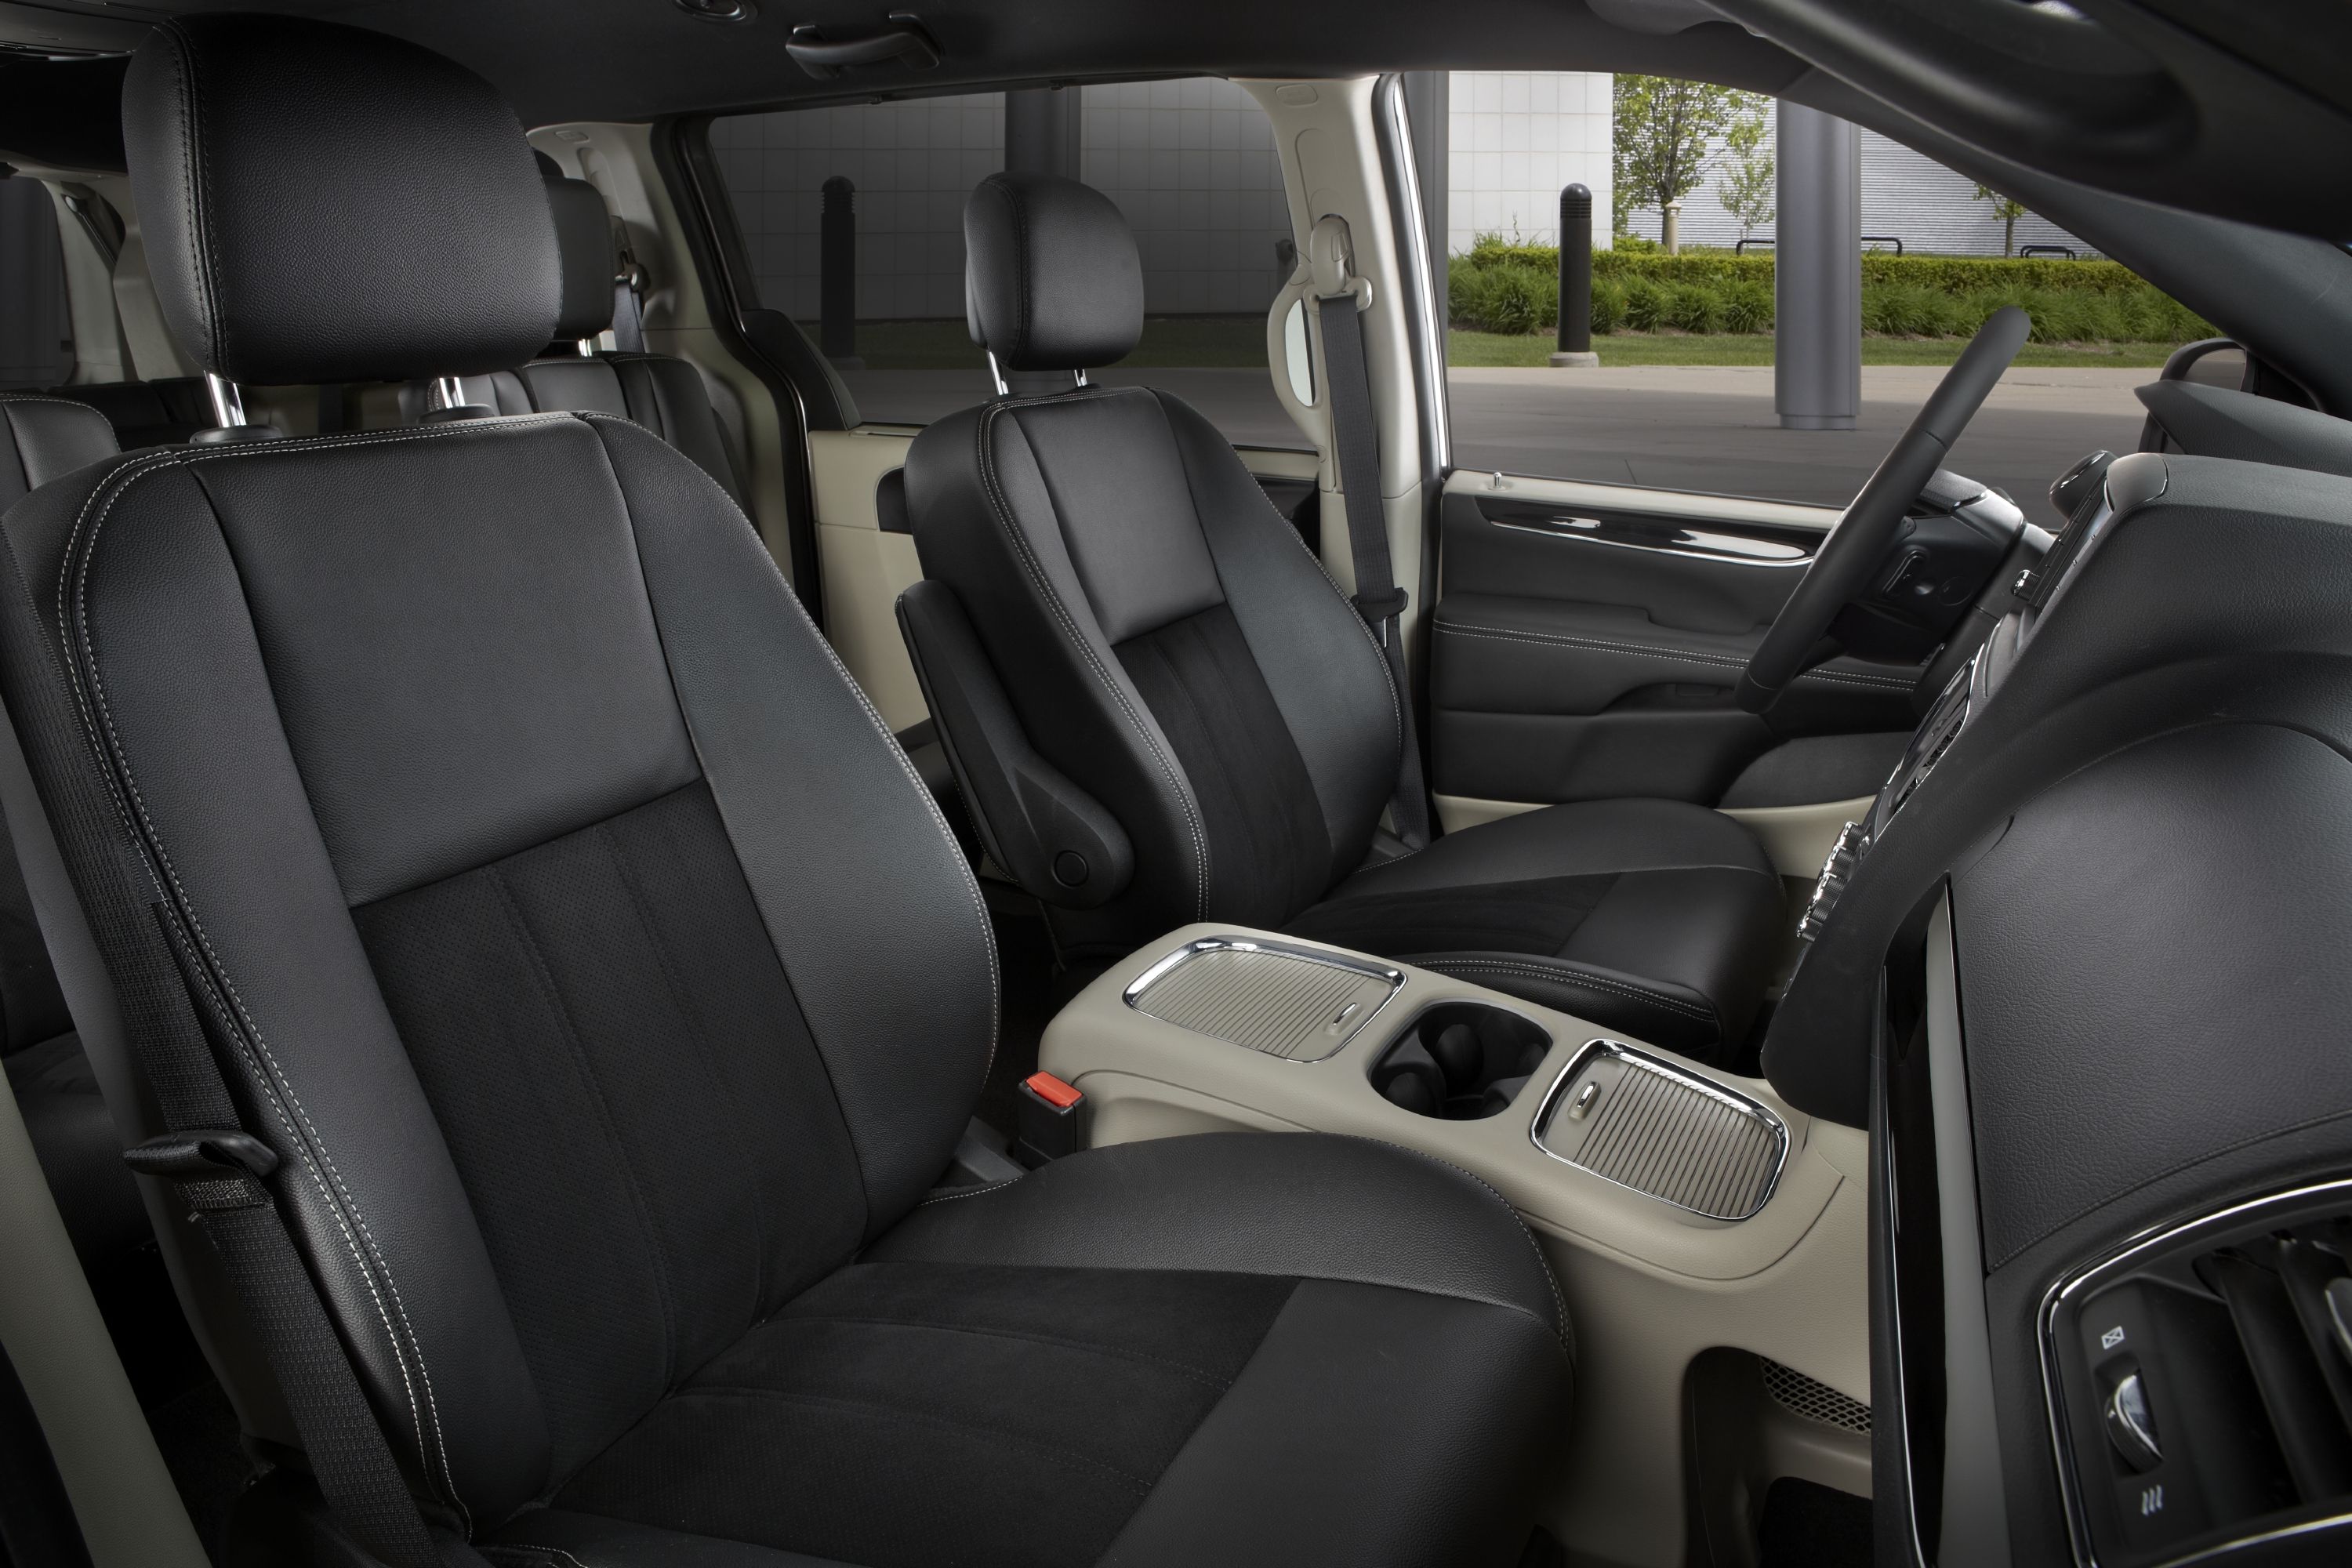 Dodge Grand Caravan Interior Dimensions With Seats Folded Down Two